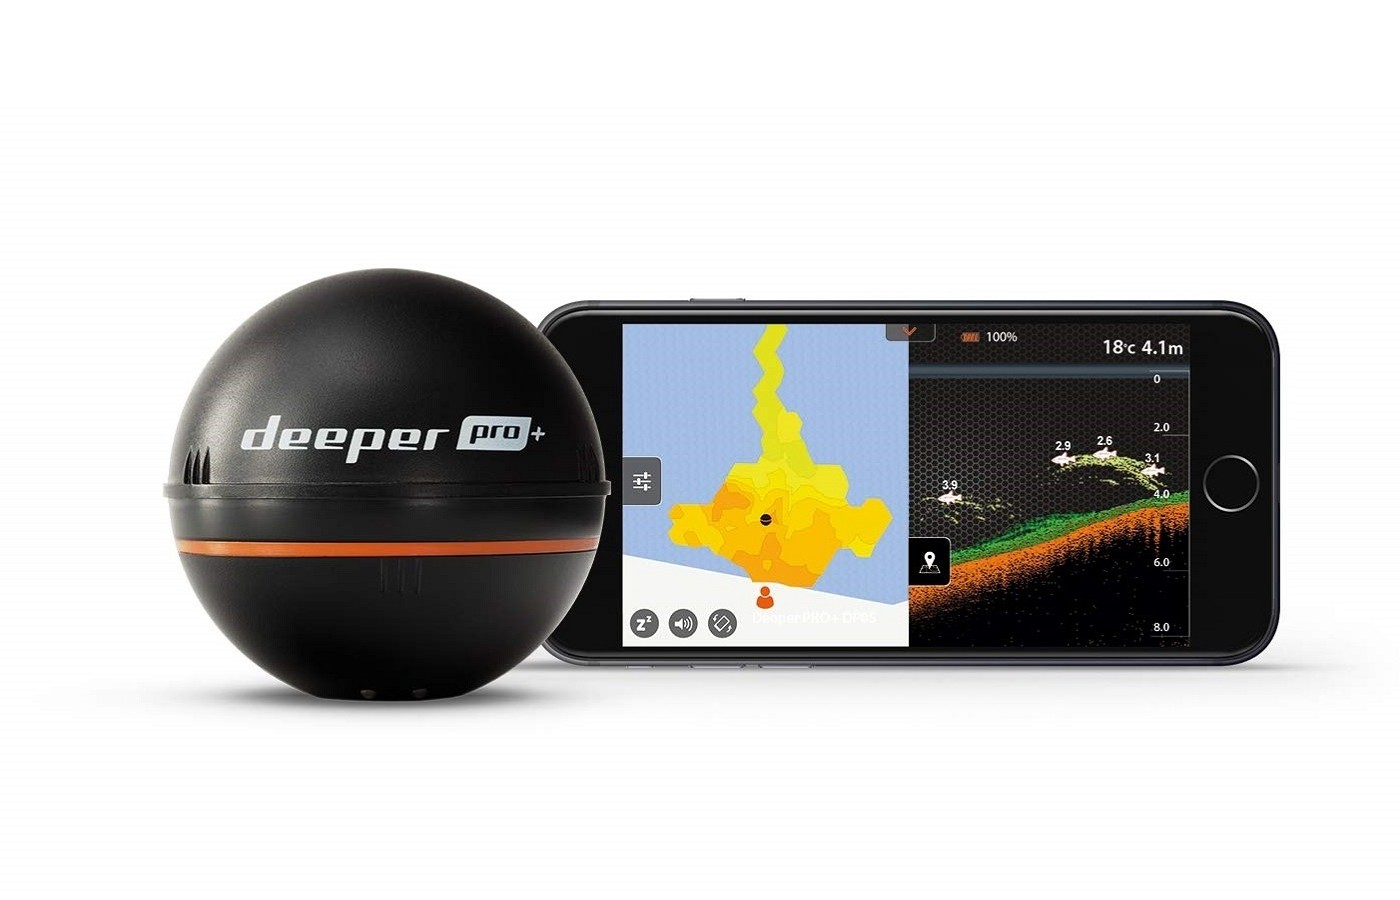 The Deeper Smart Sonar PRO+ connects to your handheld device easily and offers Wi-Fi for the best connection.